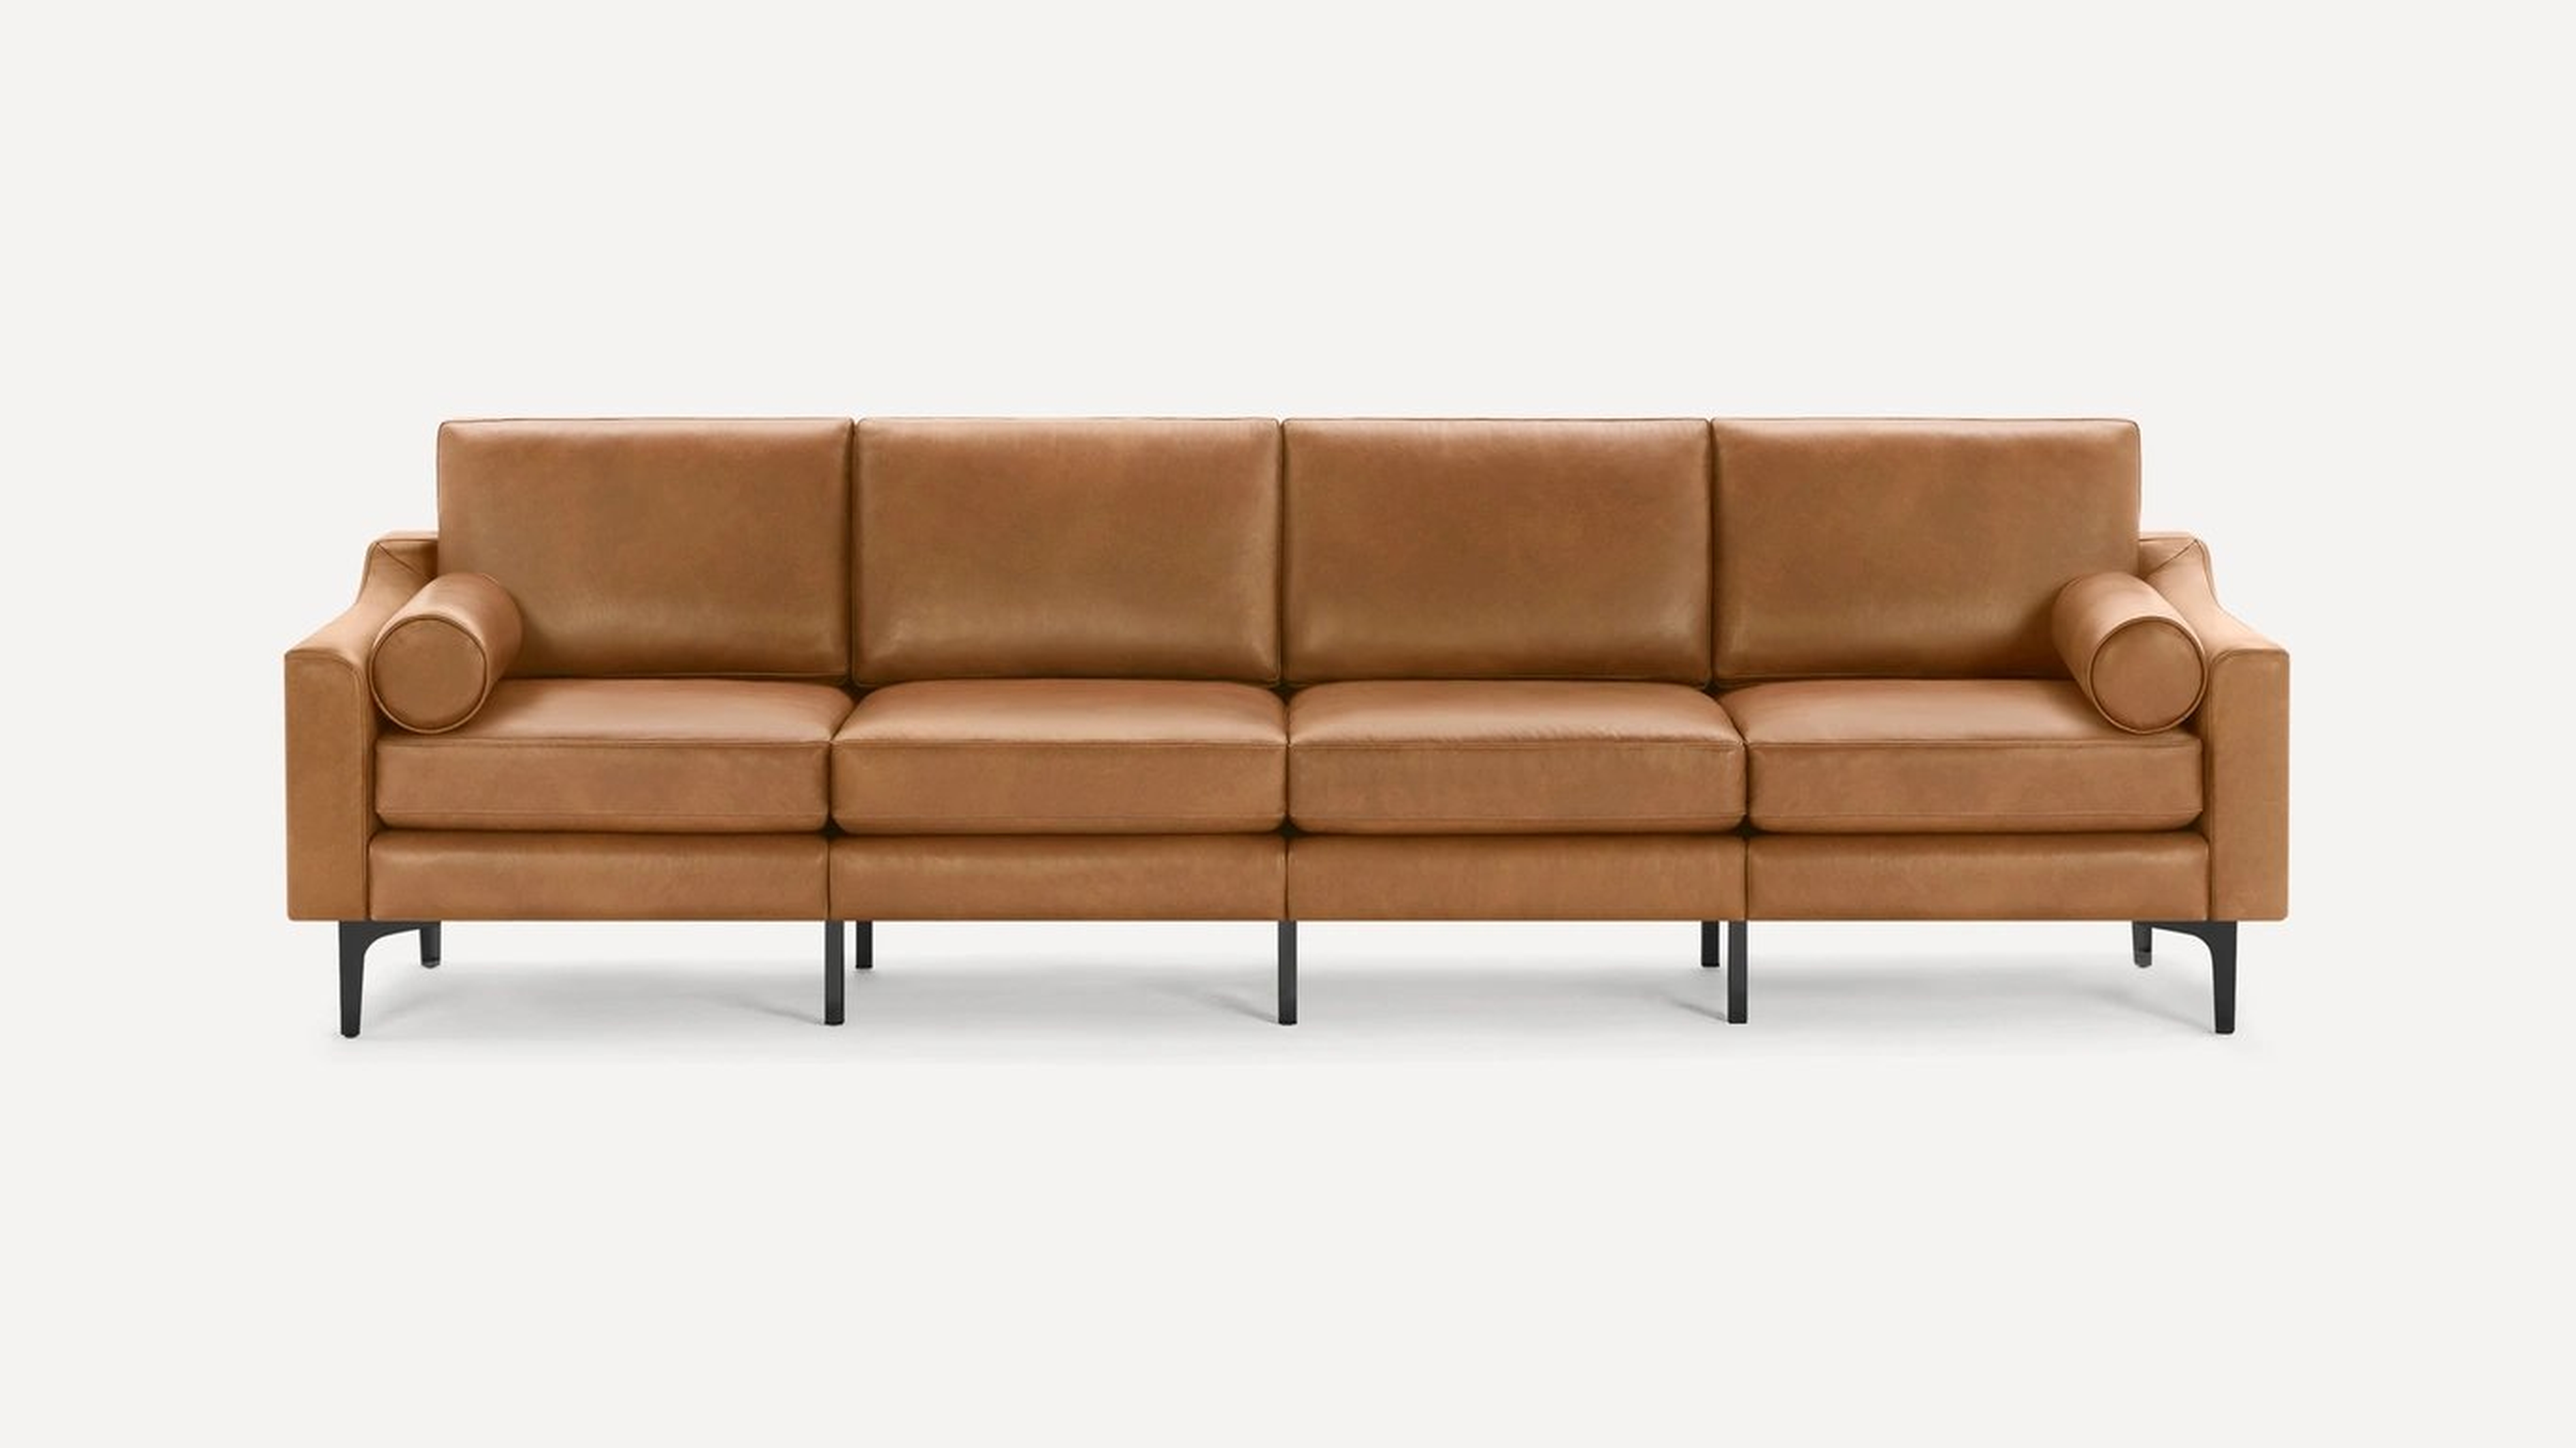 The Slope Nomad Leather King Sofa in Camel with Bolster Pillows - Burrow